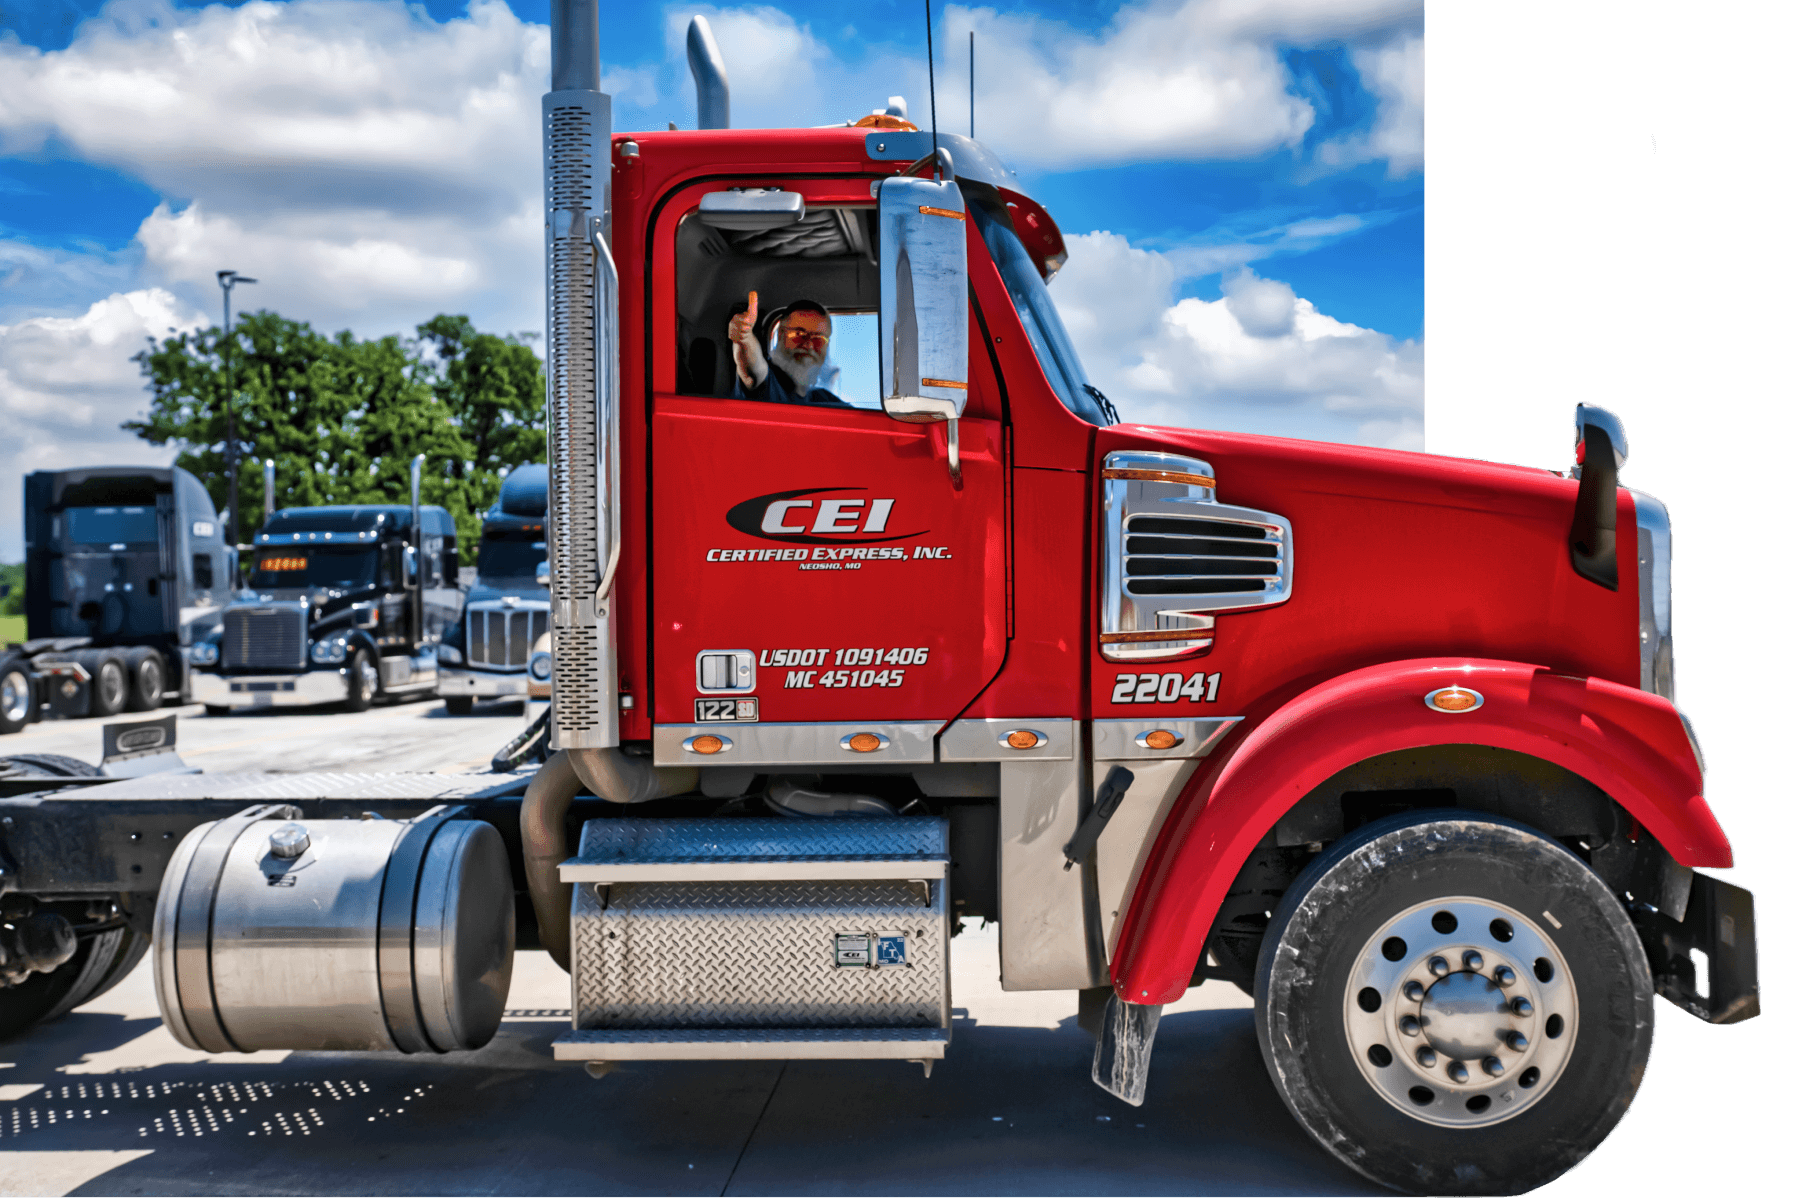 A CEI trucker signals thumbs up out the passenger window of a red truck.